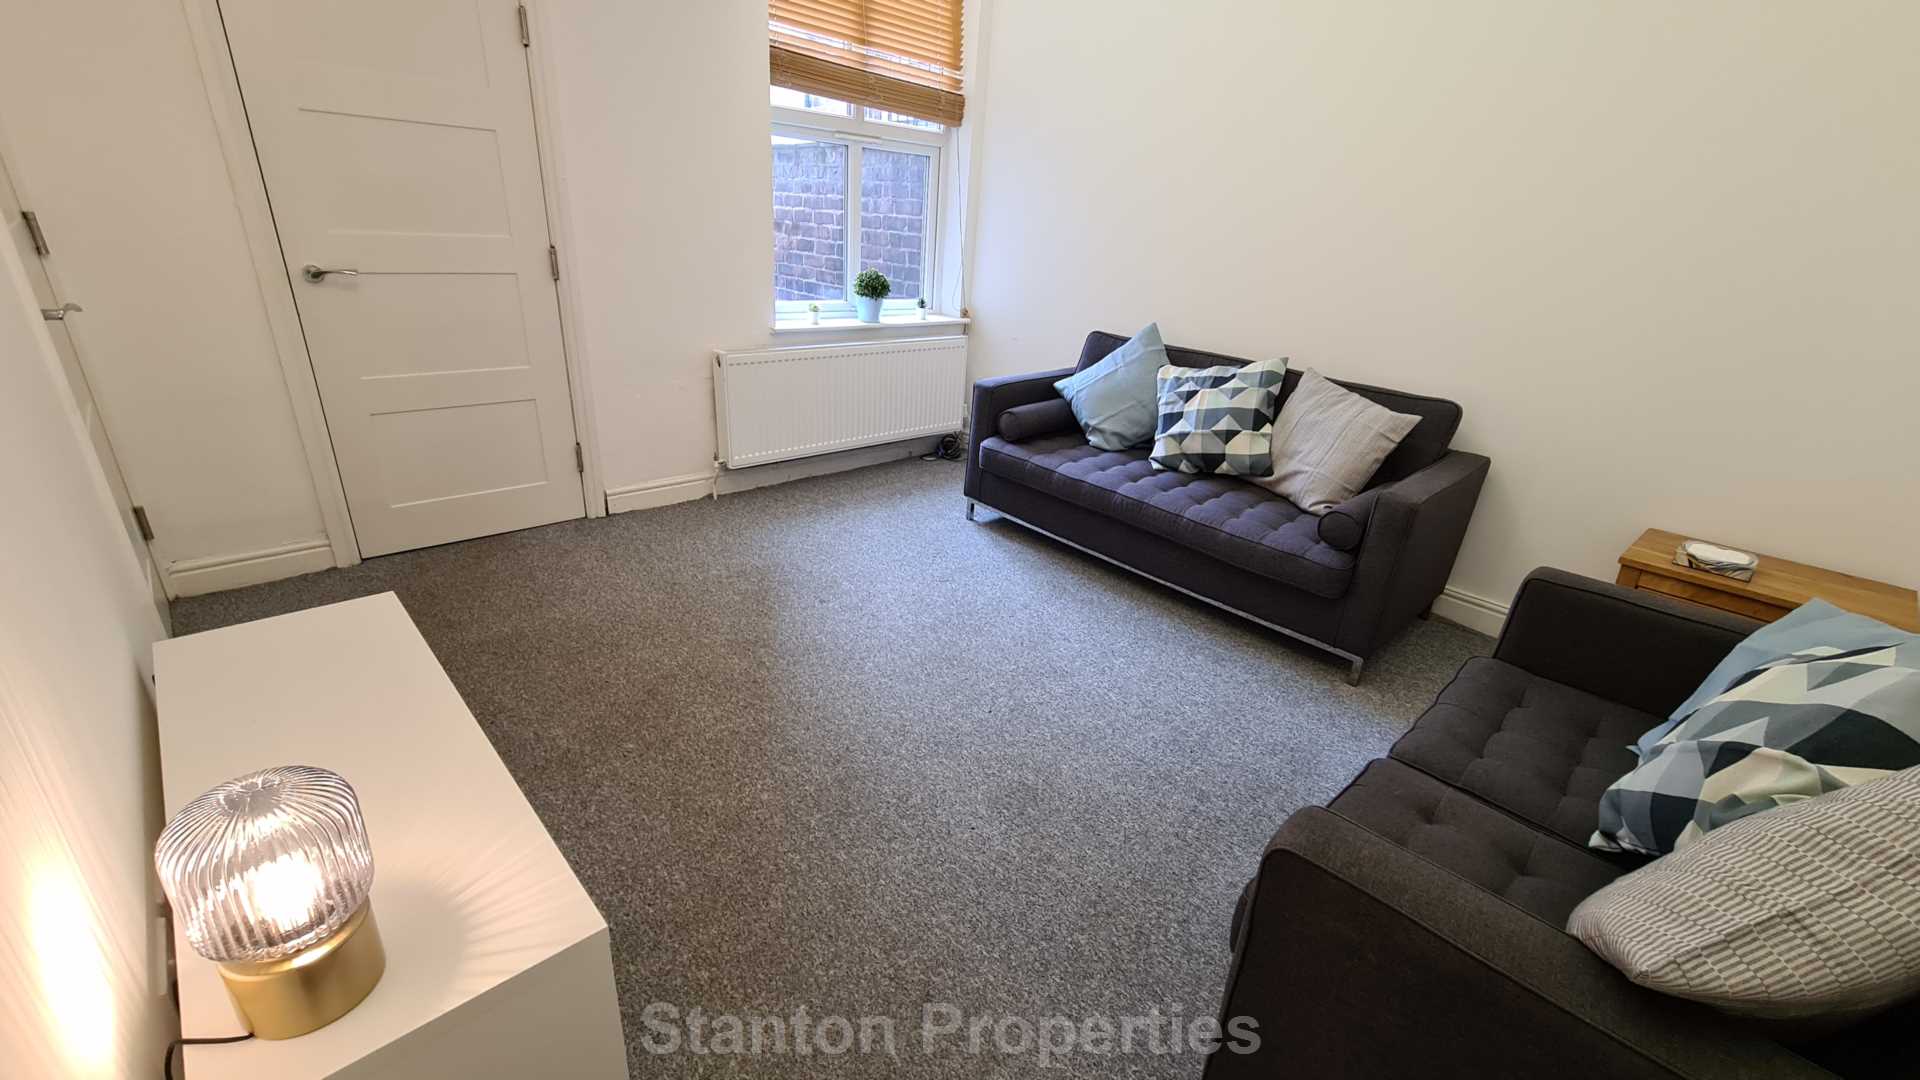 £136 pppw, See Video Tour, Furness Road, Fallowfield, Image 7